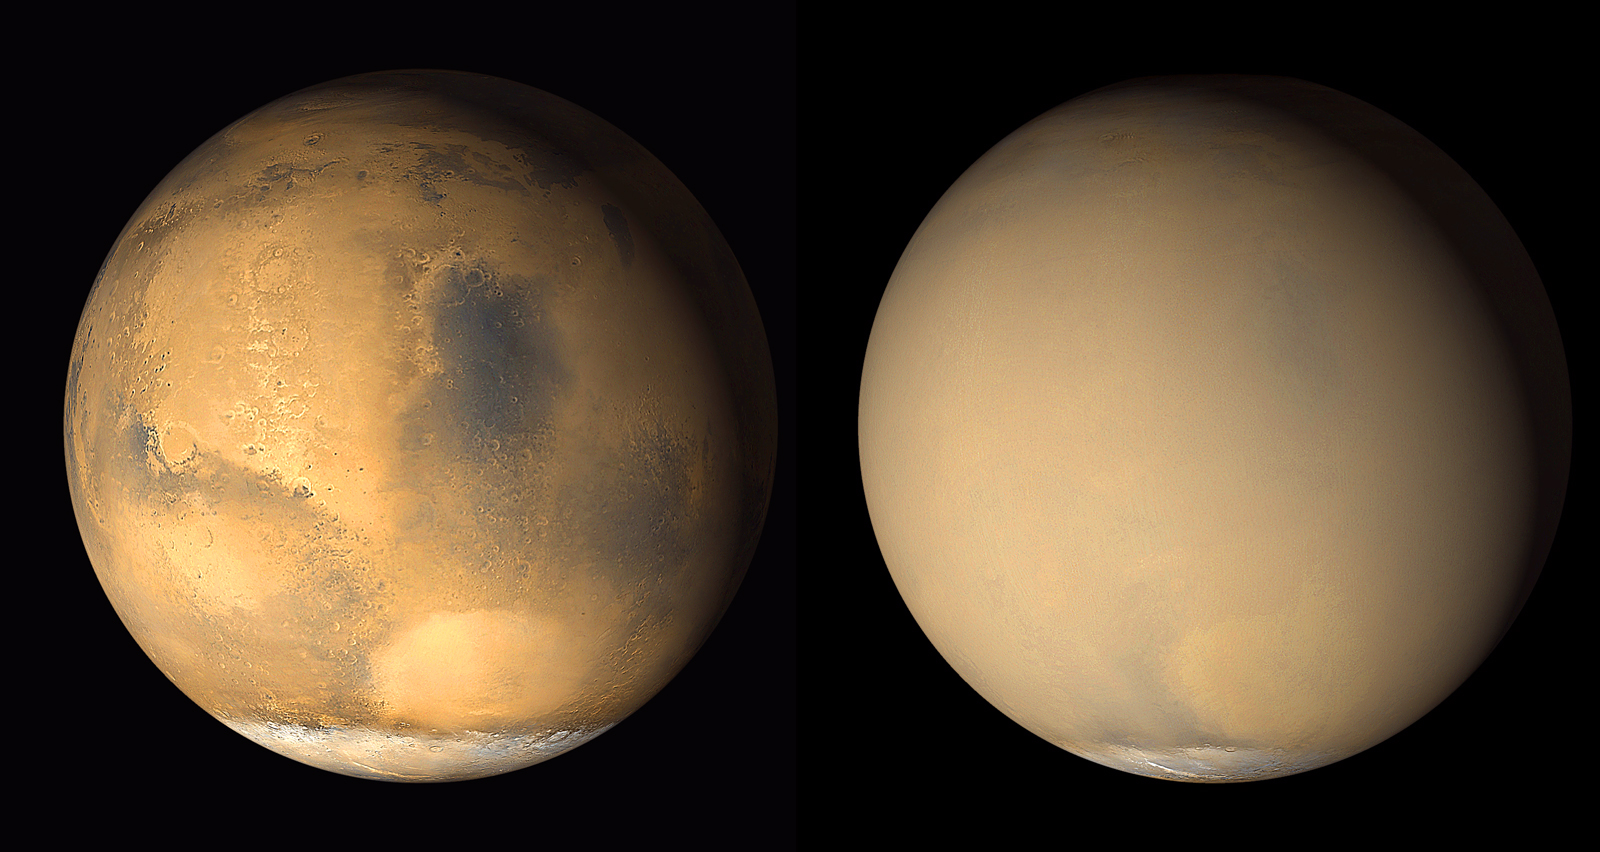 Two views of Mars show a speher on the left in multiple shades of tan, orange, and gray, with the south pole covered and white, with fine details of craters and other landforms visible throughout. The view on the right shows the sphere almost entirely covered in a uniform haze of light tan, with only some of the lighter south pole visible outside of the dusty murk.